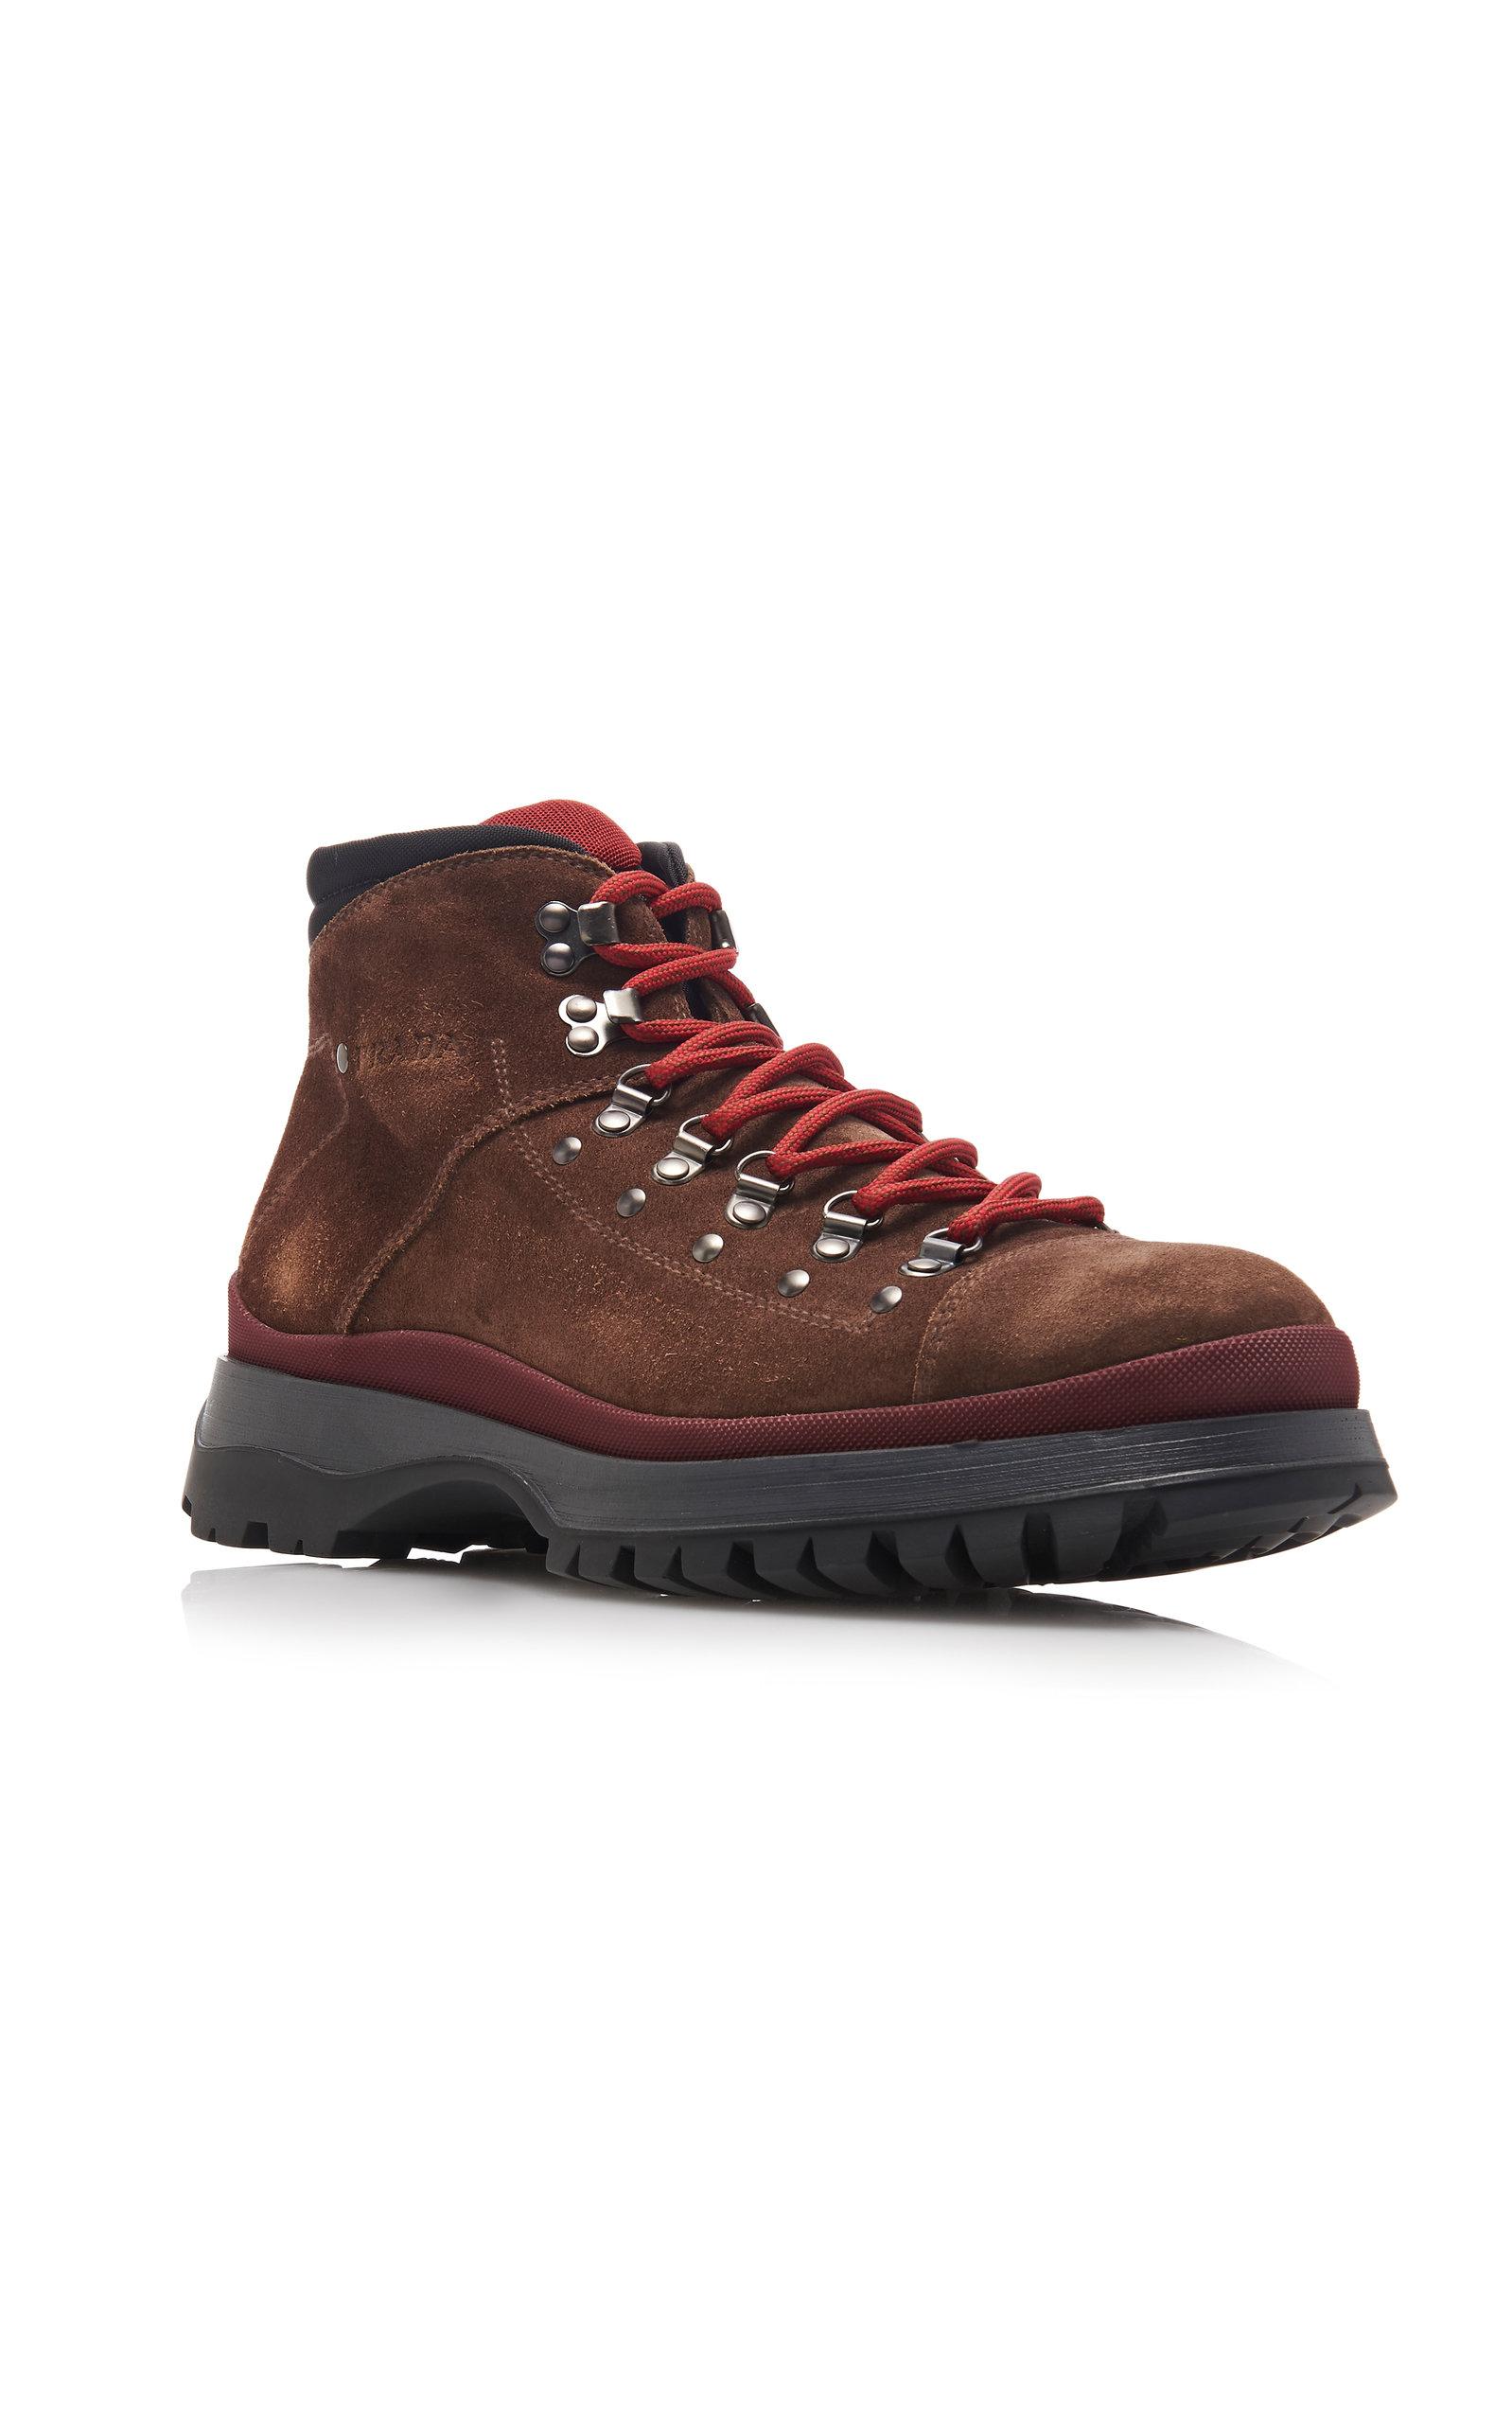 Prada Leather Suede Hiking Boot in Brown for Men - Lyst